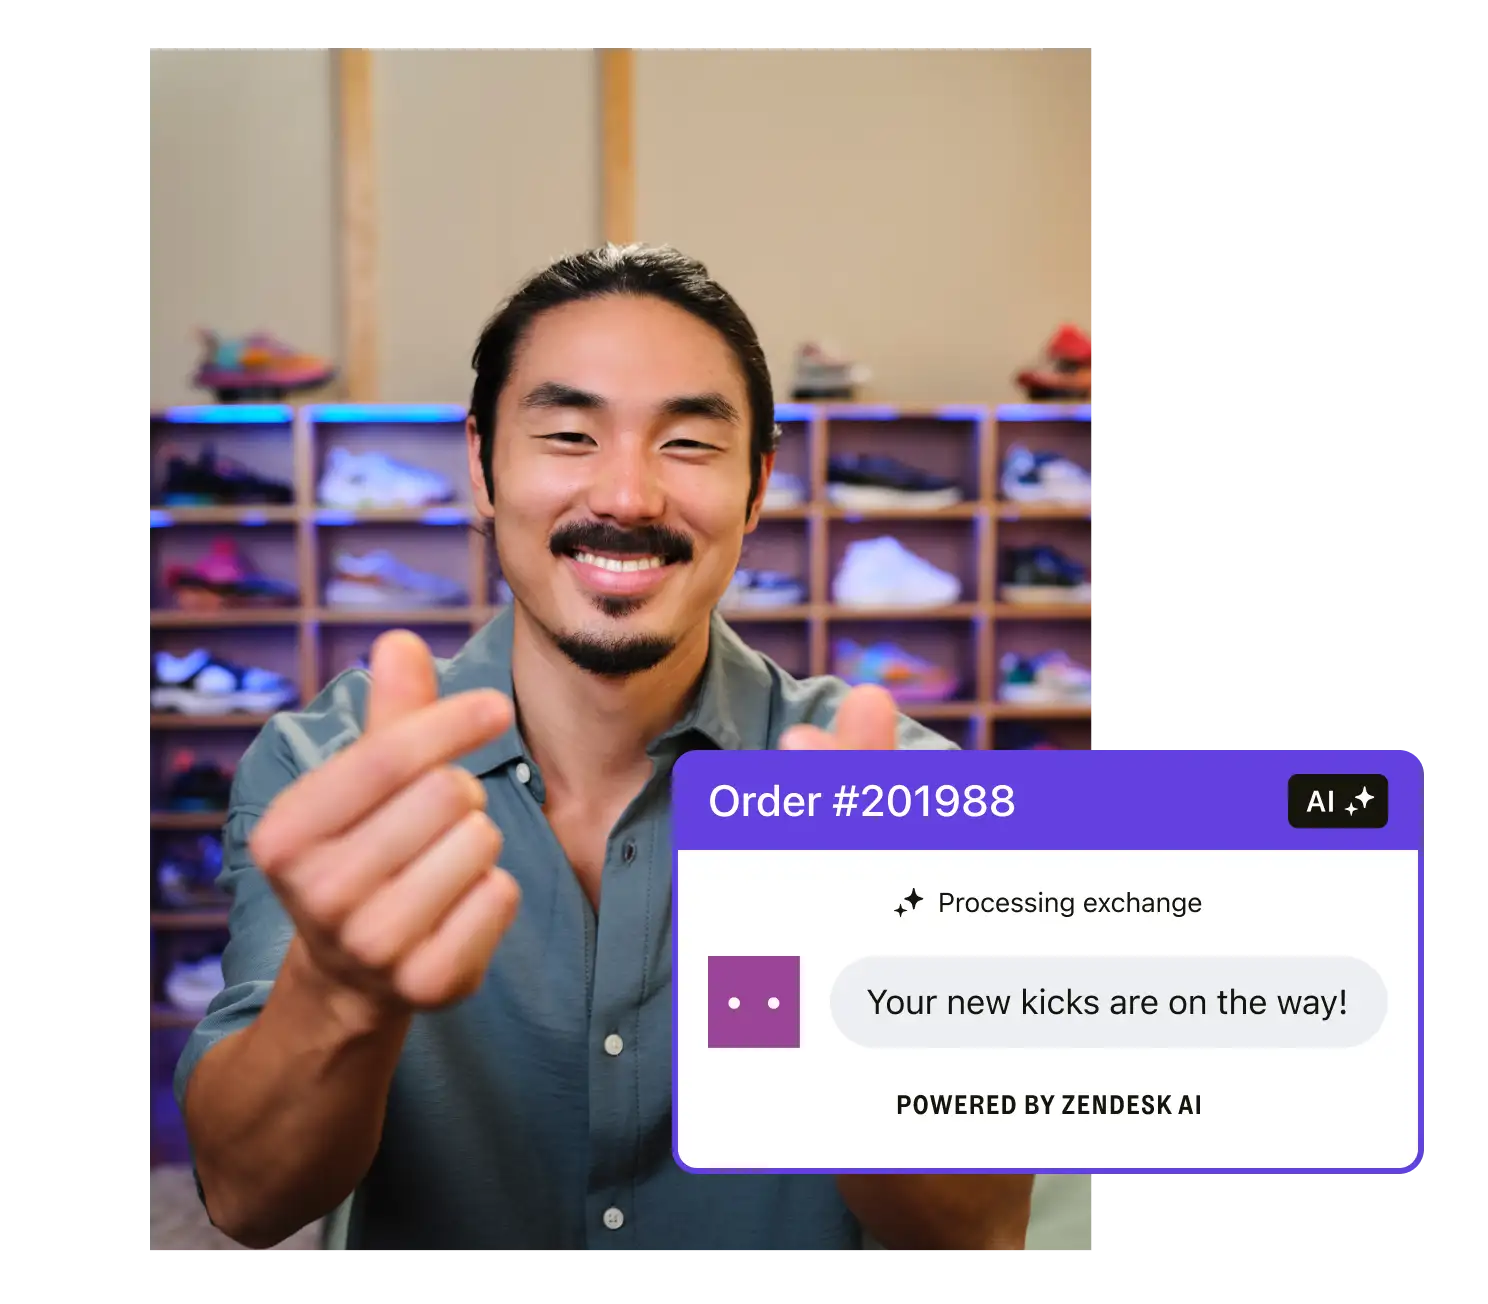 A man smiles and makes heart shapes with his fingers. Behind him is a large cabinet filled with colorful sneakers. A screenshot placed on top of the image shows a customer service interaction where an AI-powered bot is automatically processing a sneaker return.